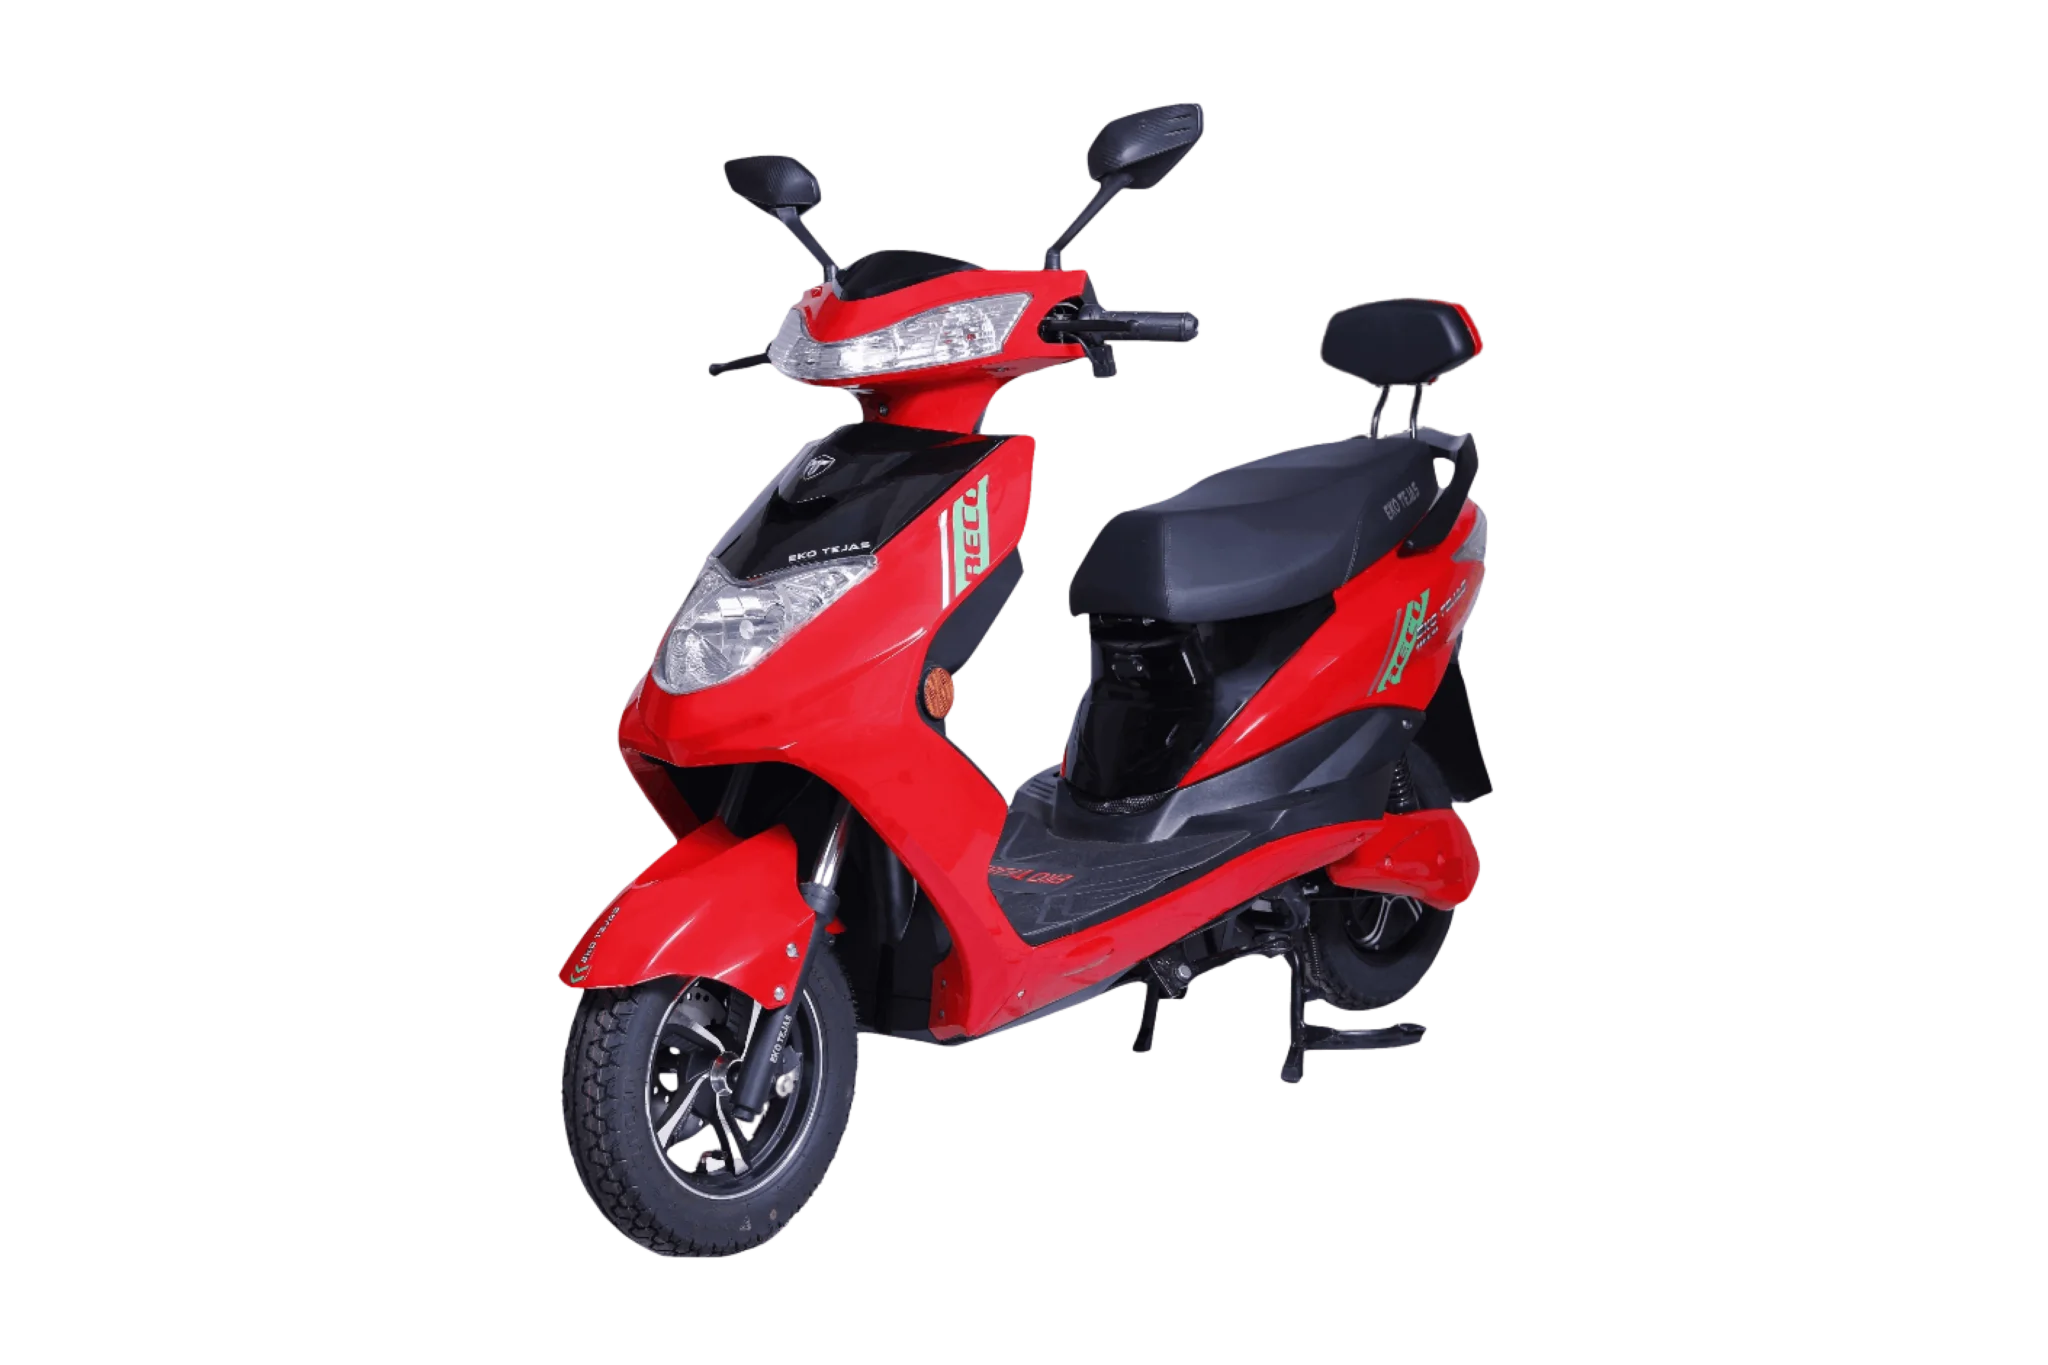 Battery Moped Electric Scooter, Vehicle Model: Vev 01 at Rs 45000 in Chennai